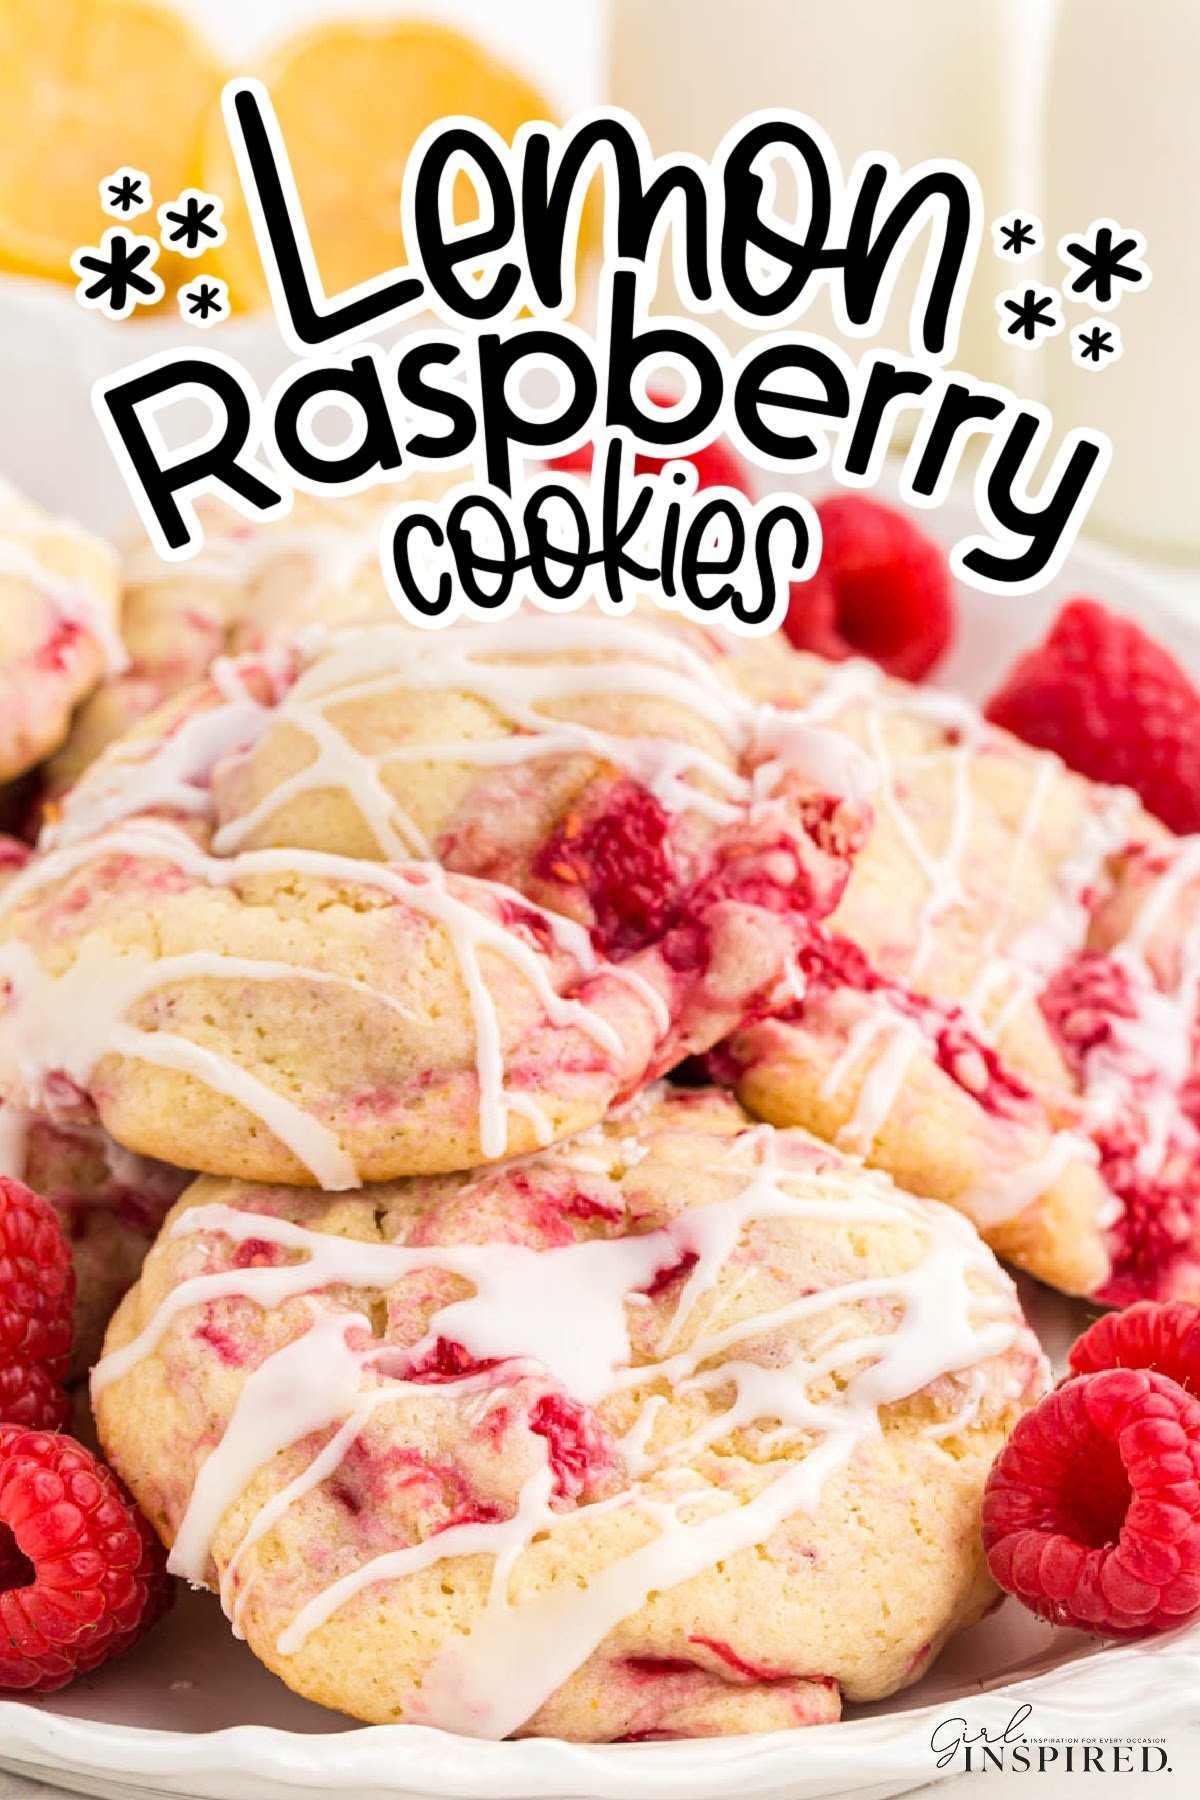 Lemon Raspberry cookies in a stack, showing the raspberry berries throughout, with text overlay.